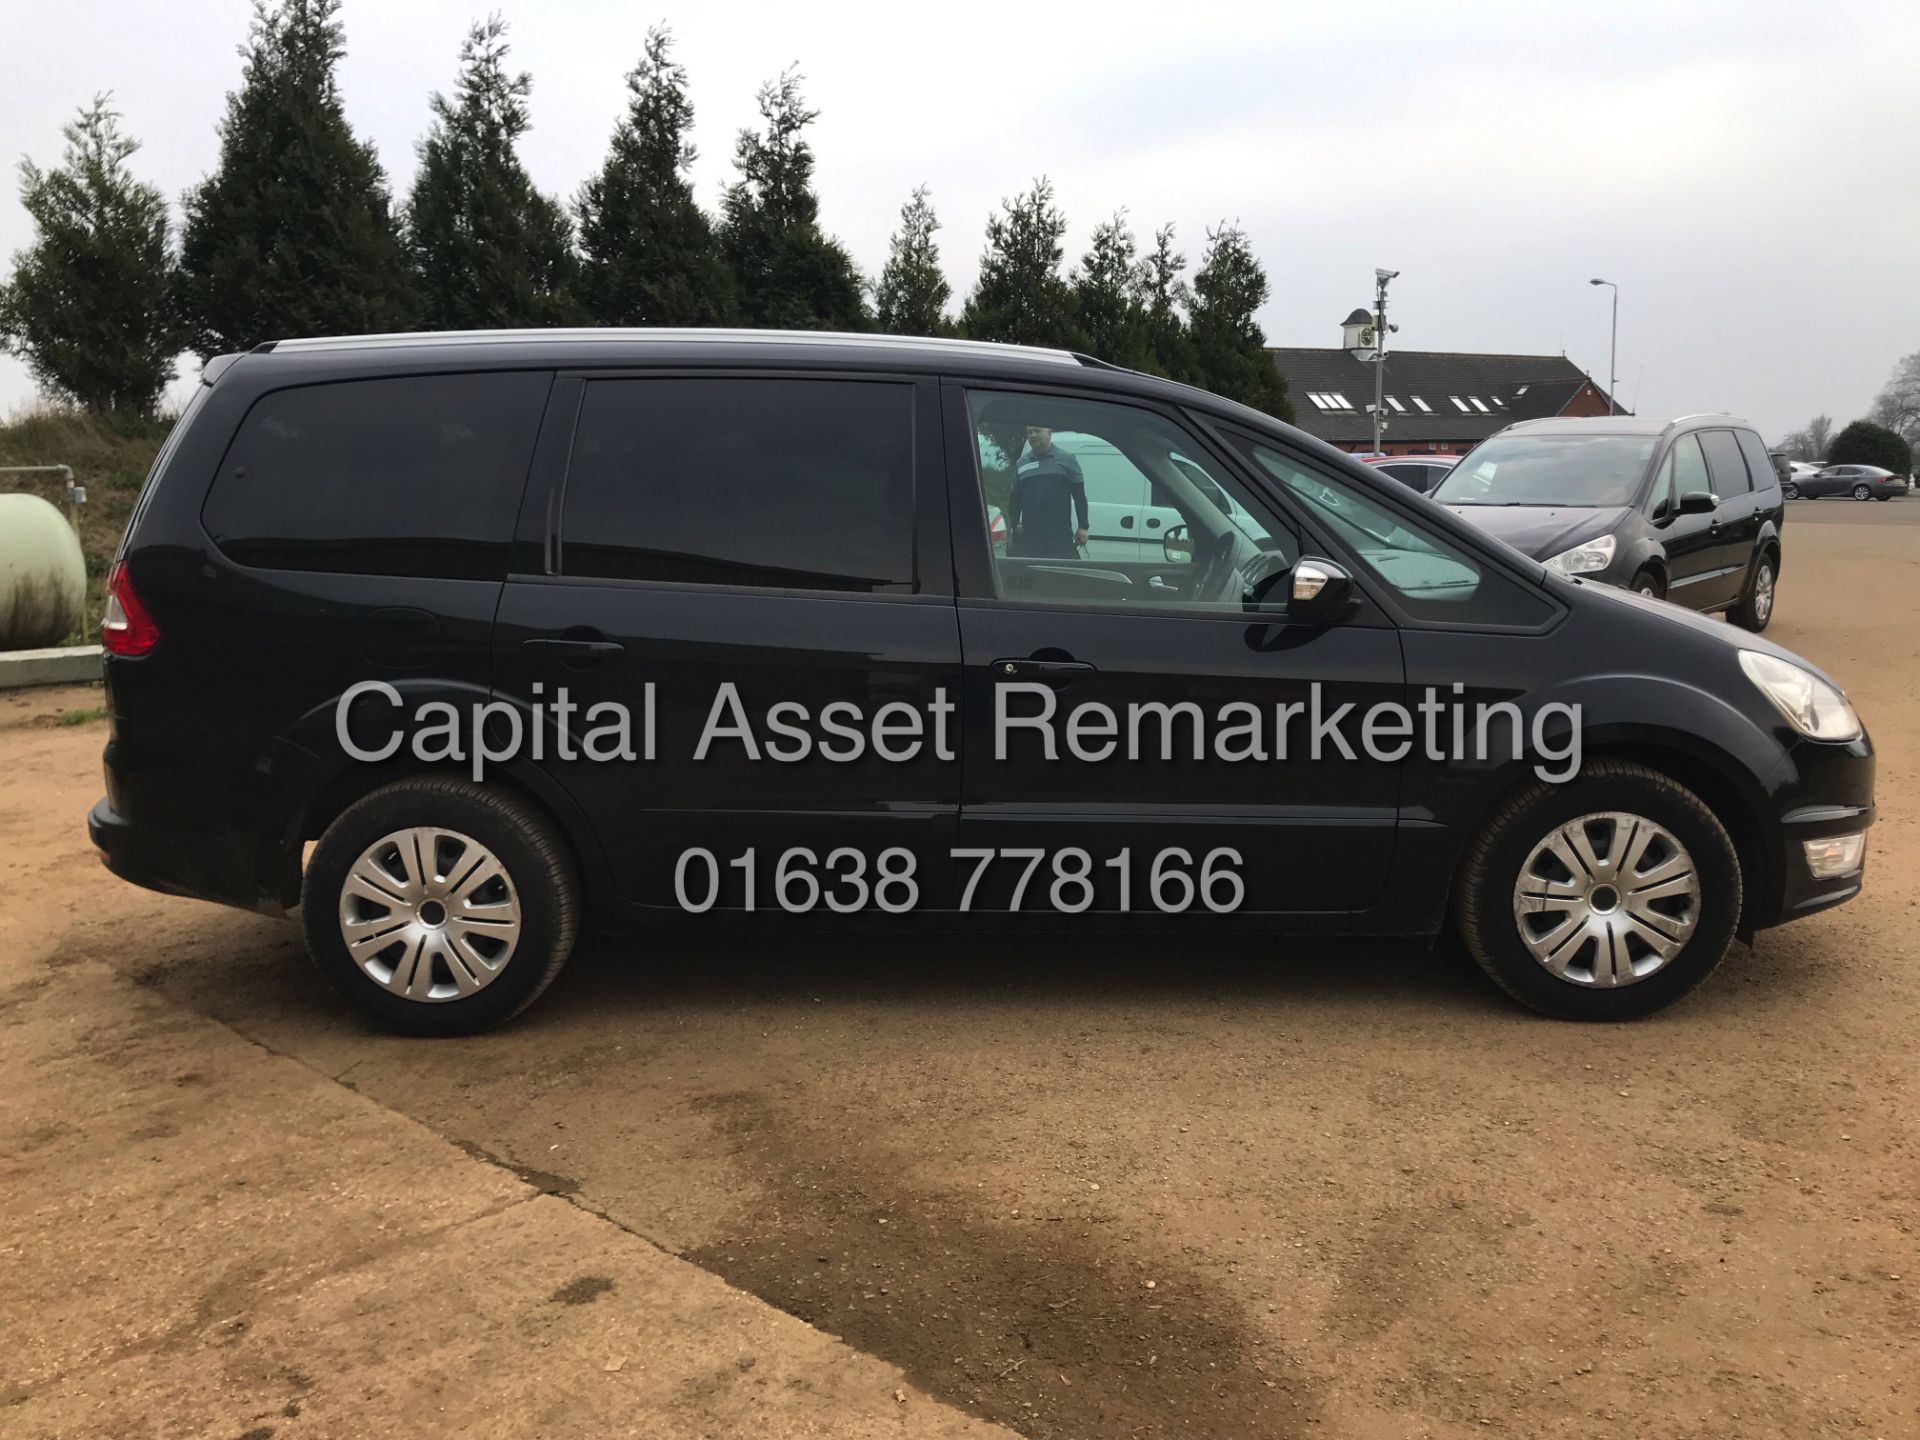 FORD GALAXY 2.0 TDCI "POWER-SHIFT / ZETEC" 7 SEATER (15 REG - NEW SHAPE) 1 OWNER - 140BHP - AIR CON - Image 2 of 22